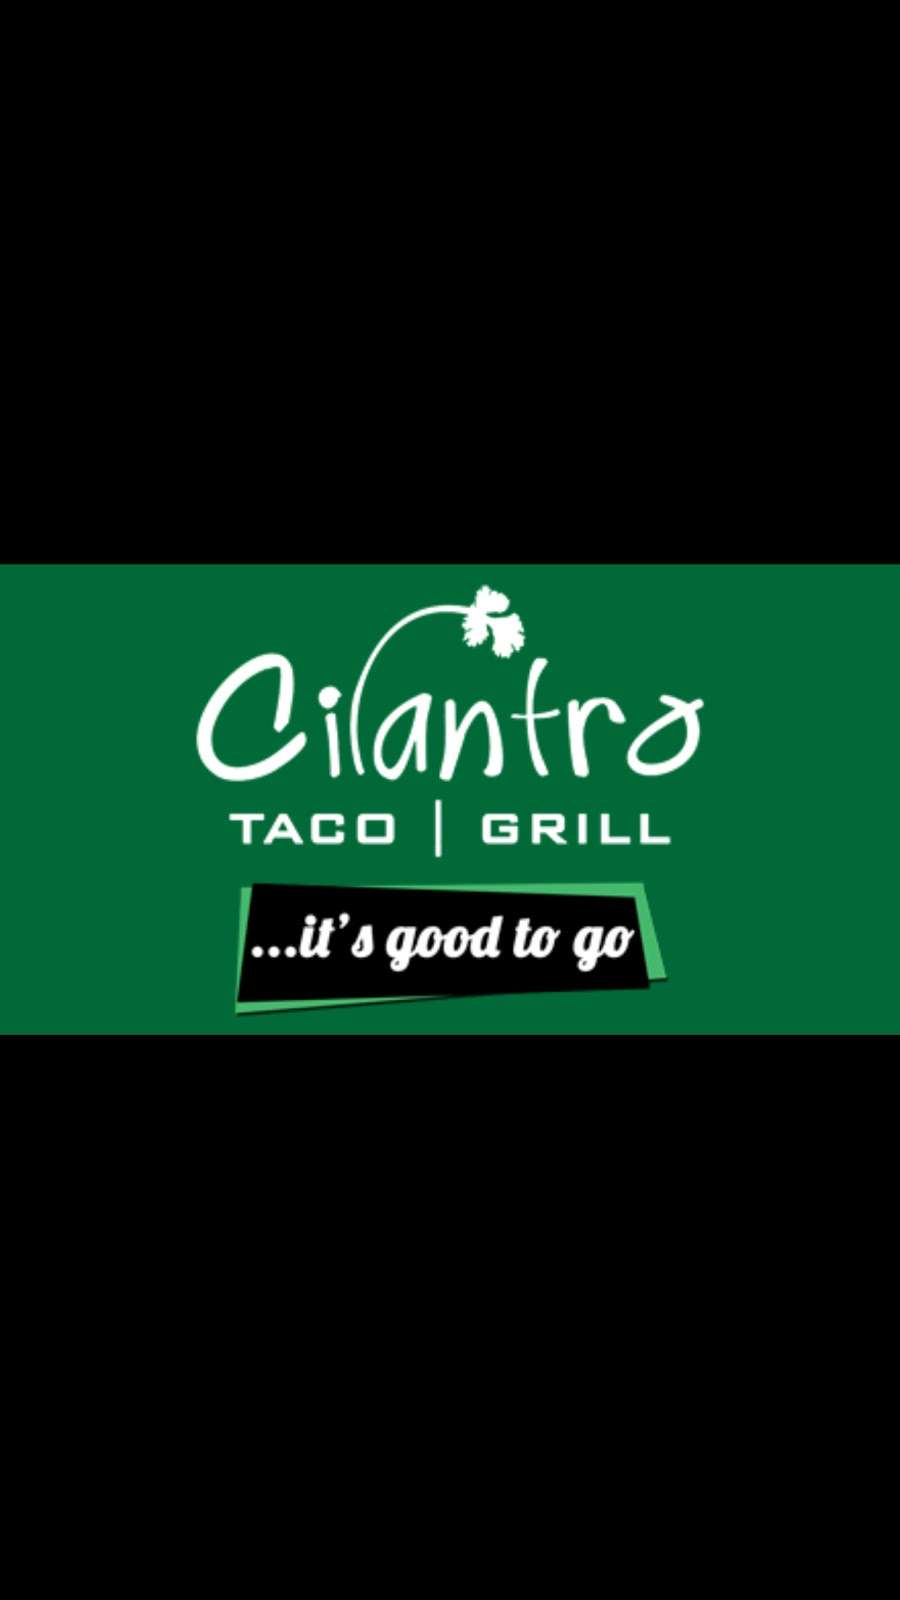 Cilantro Taco Grill | 142 S Gary Ave, Bloomingdale, IL 60108 | Phone: (224) 653-9668